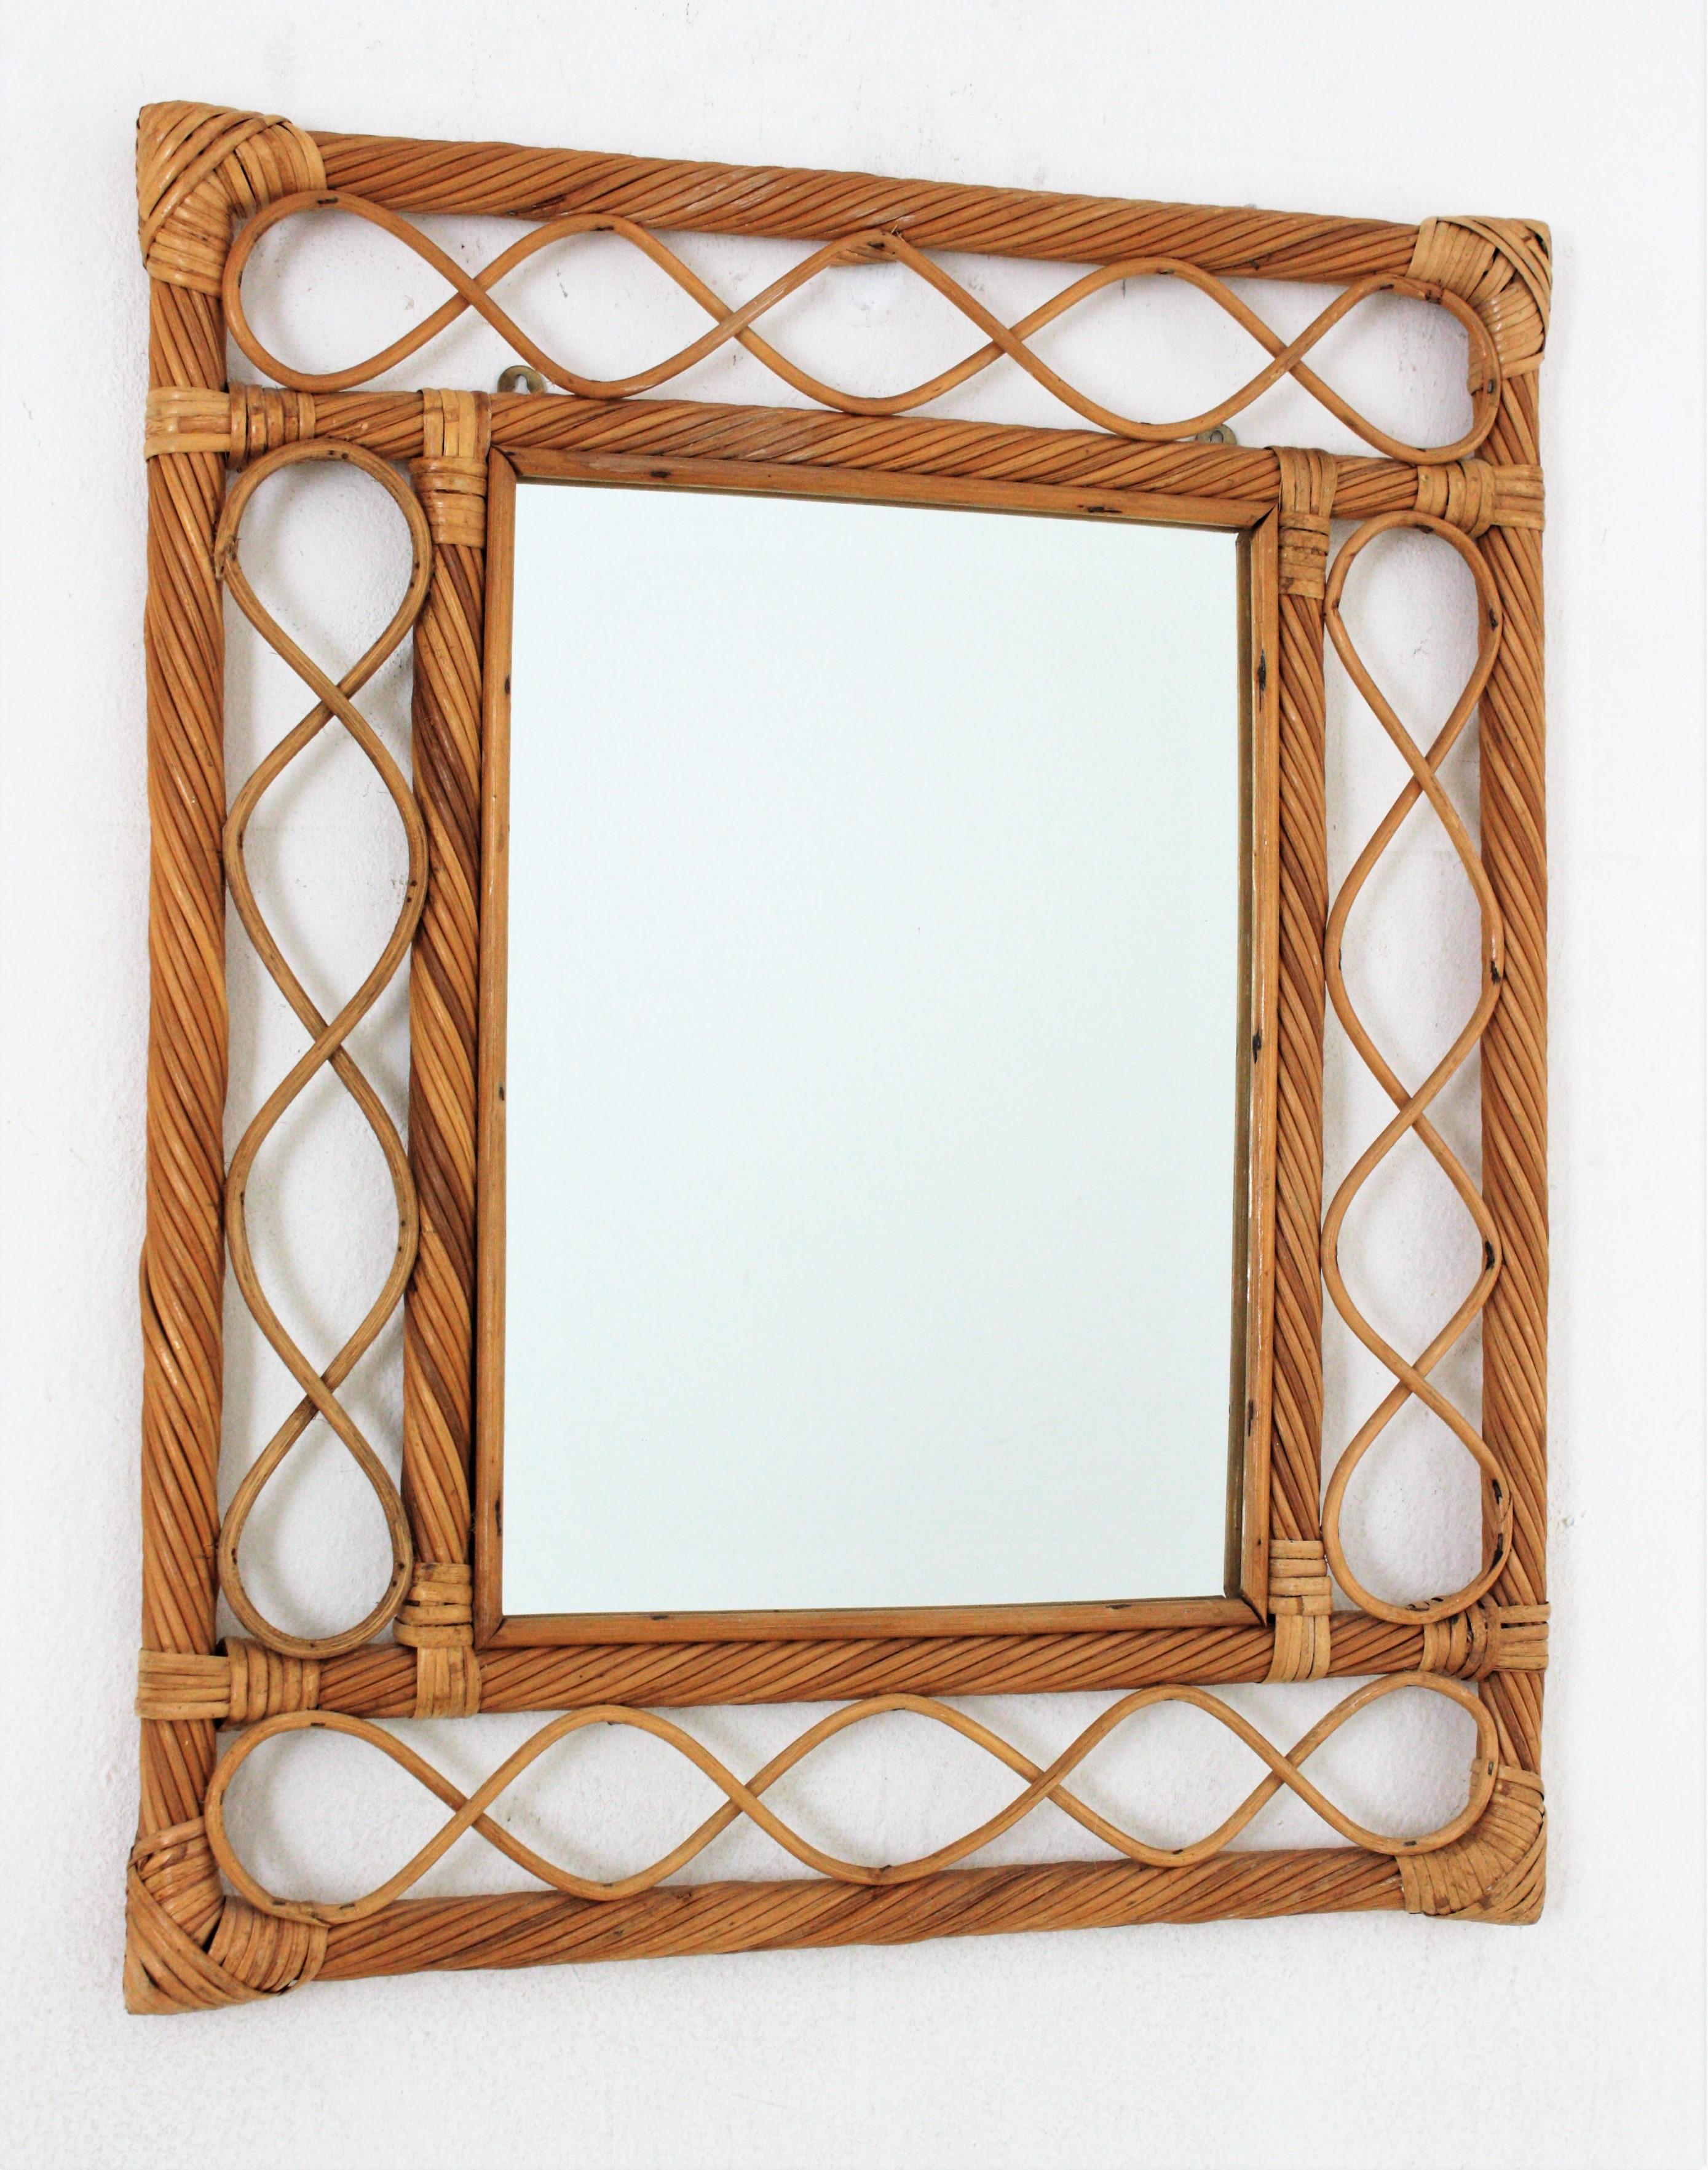 Eye-catching Mid-Century Modern Franco Albini style handcrafted attan mirror. Italy, 1960s.
This mirror features a rectangular frame made of pencil reed rattan canes and decorative rattan undulations.
This rattan mirror will be a nice addition